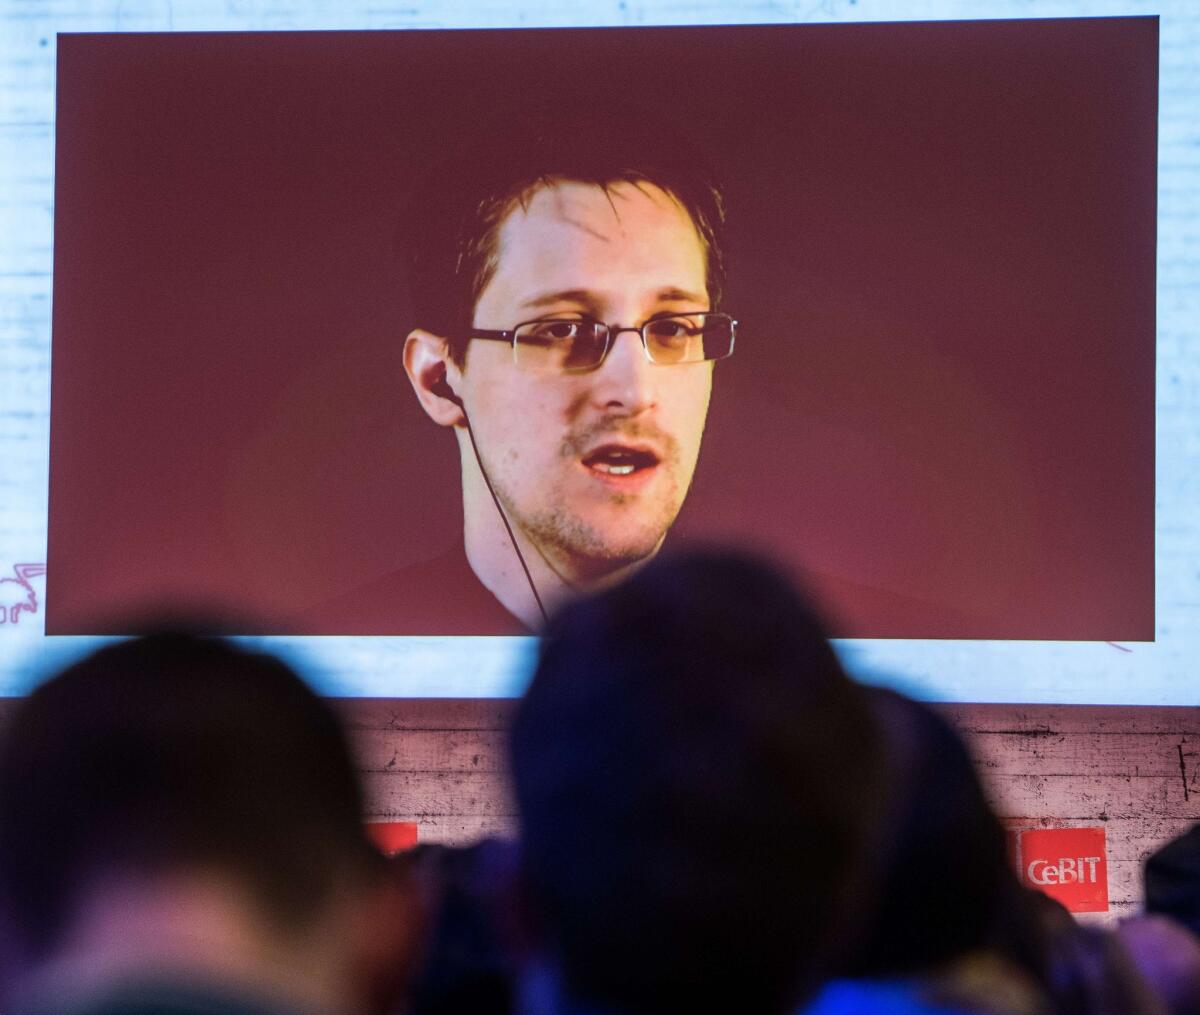 Edward Snowden speaks via live video call during the CeBIT technology fair in Hanover, Germany on March 18. International speakers from business and government discuss the big issues and challenges of the digital world during the fair.